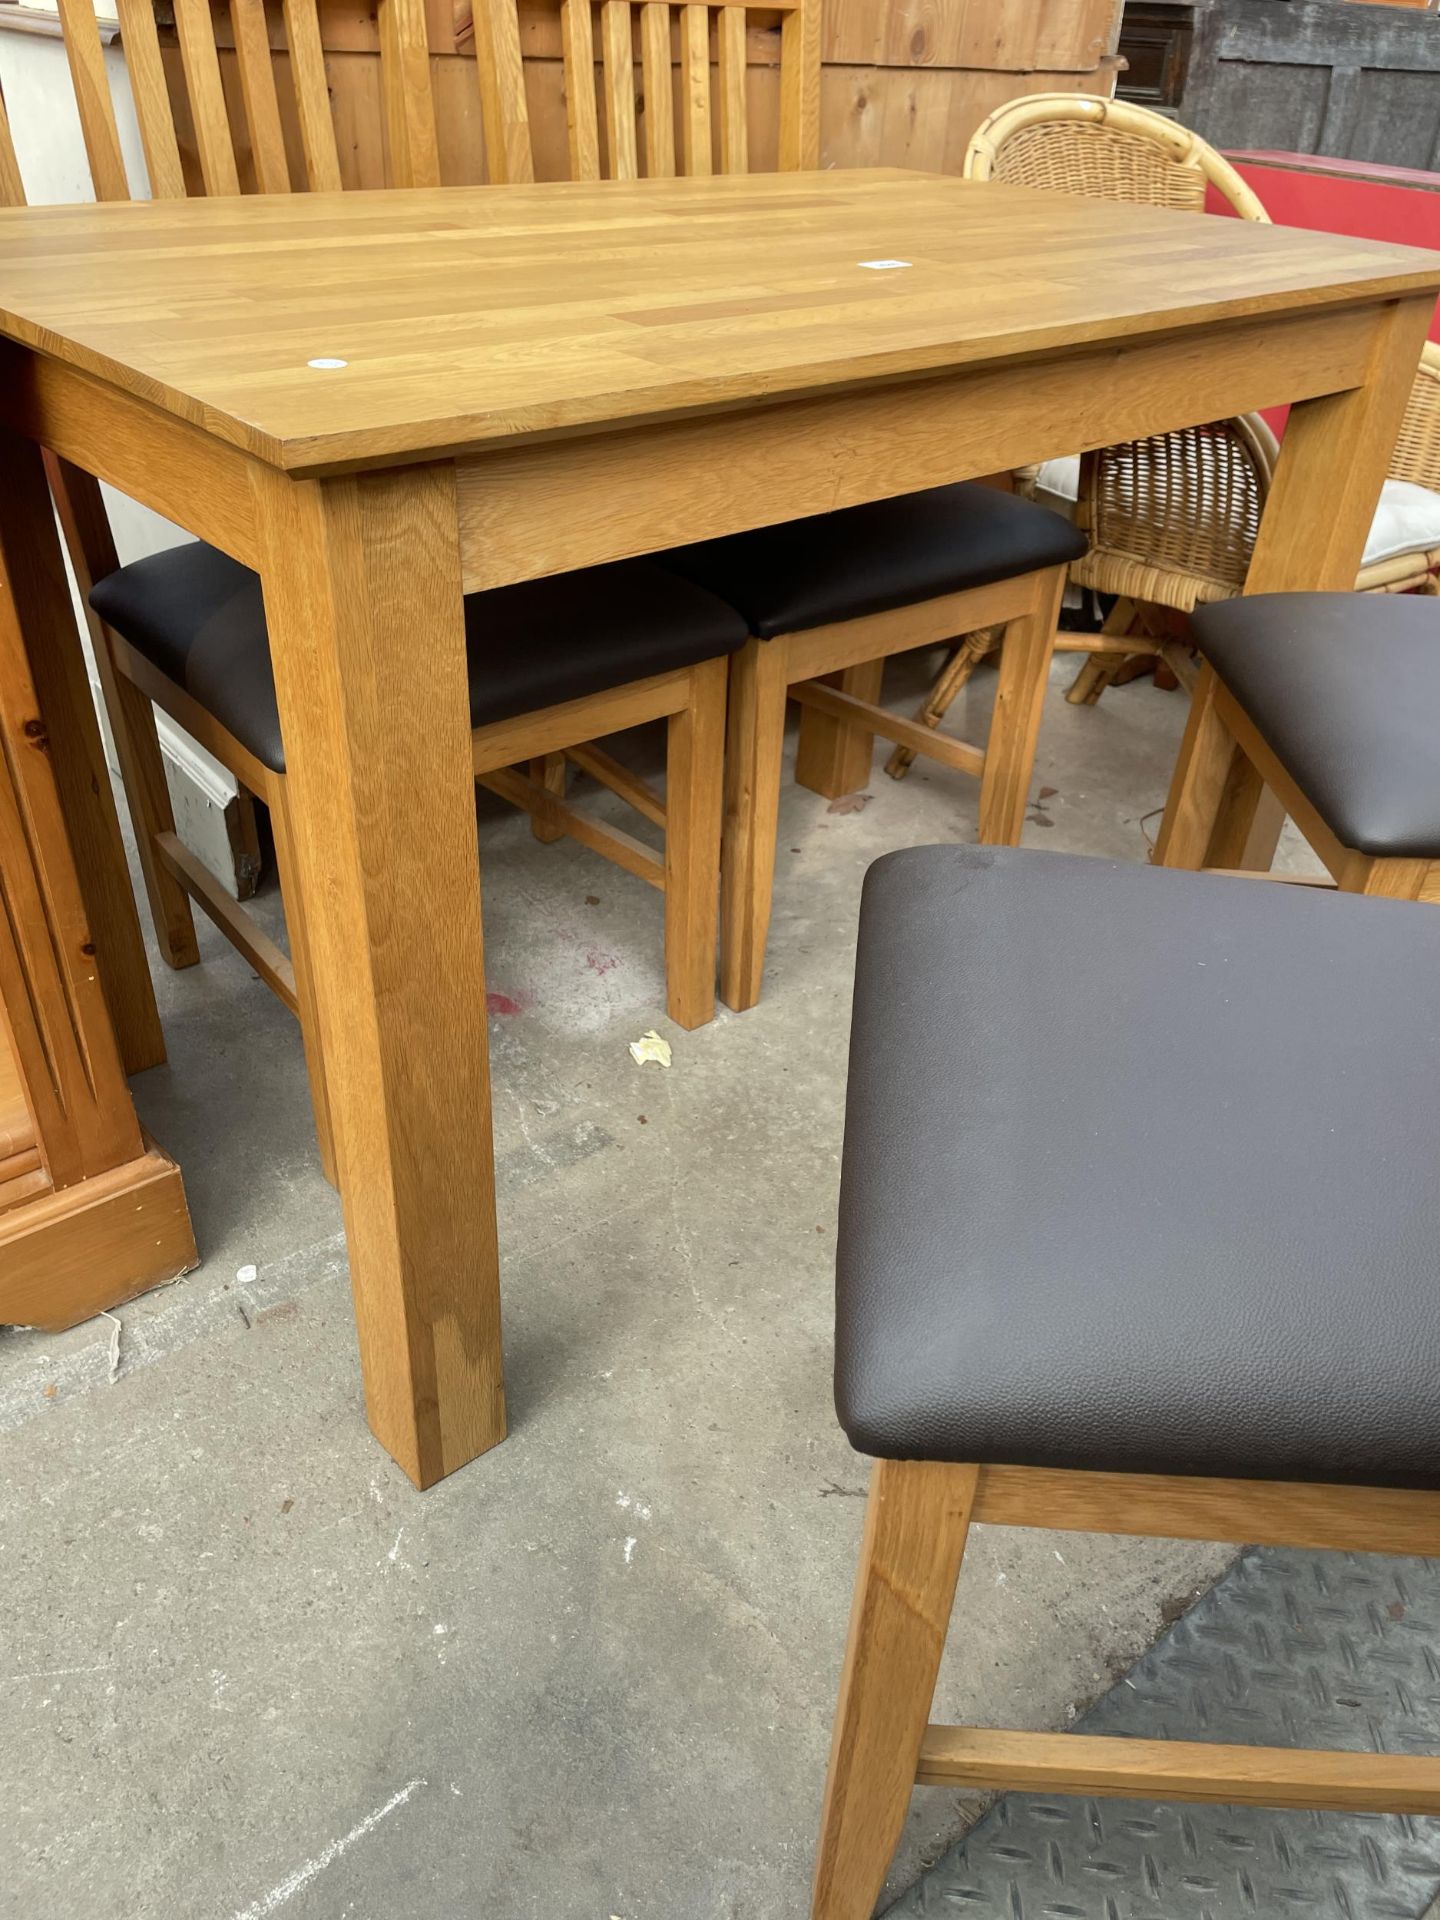 A MODERN OAK WOODBLOCK DINING TABLE, 45" X 28", AND FOUR CHAIRS - Image 3 of 5